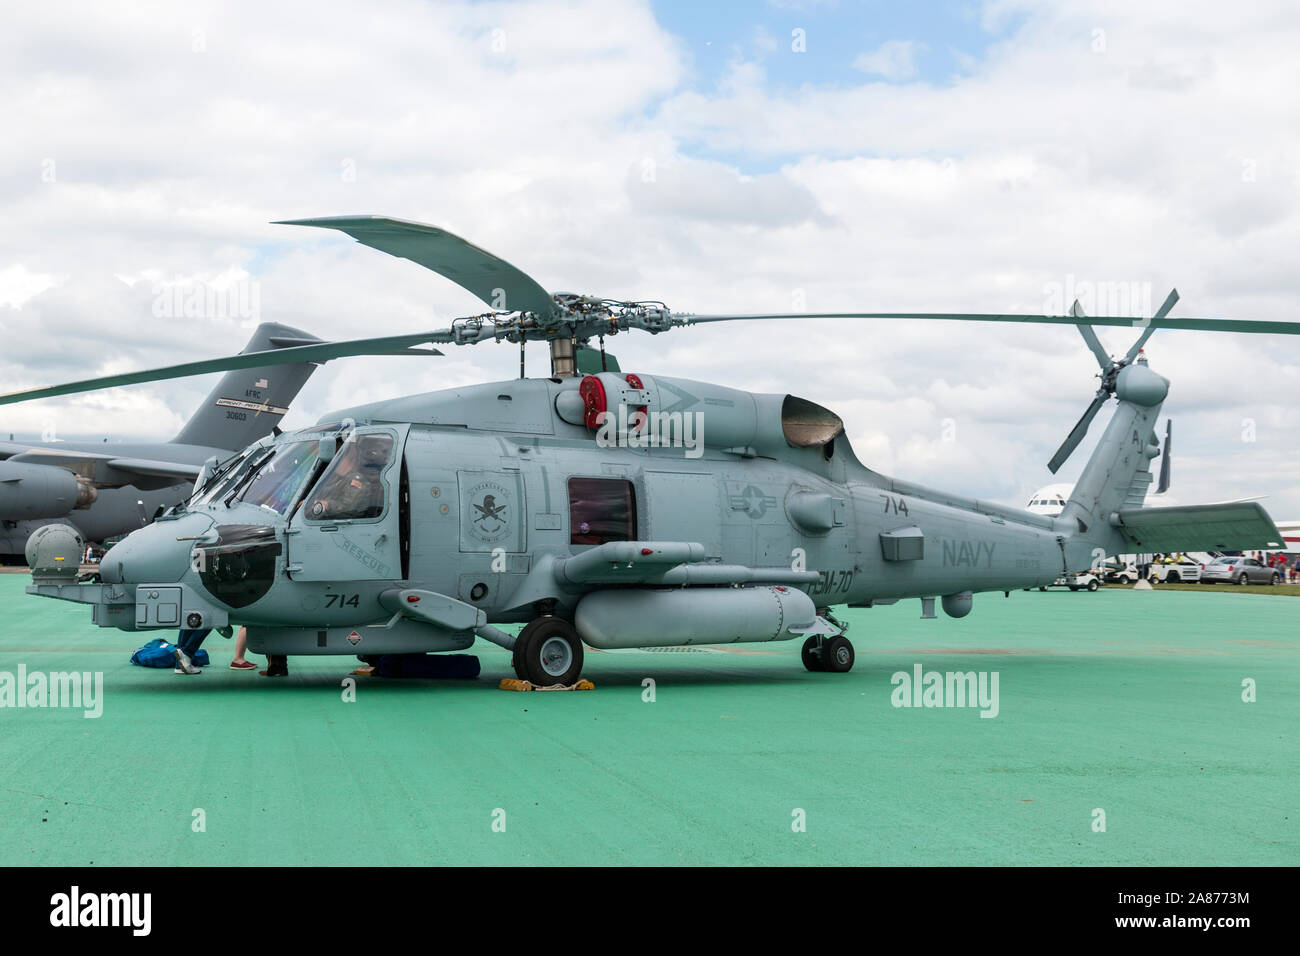 VANDALIA, OHIO / USA - JUNE 23, 2018: A United States Navy Sikorsky SH-60 Seahawk sits on static display at the 2018 Vectren Dayton Airshow. Stock Photo